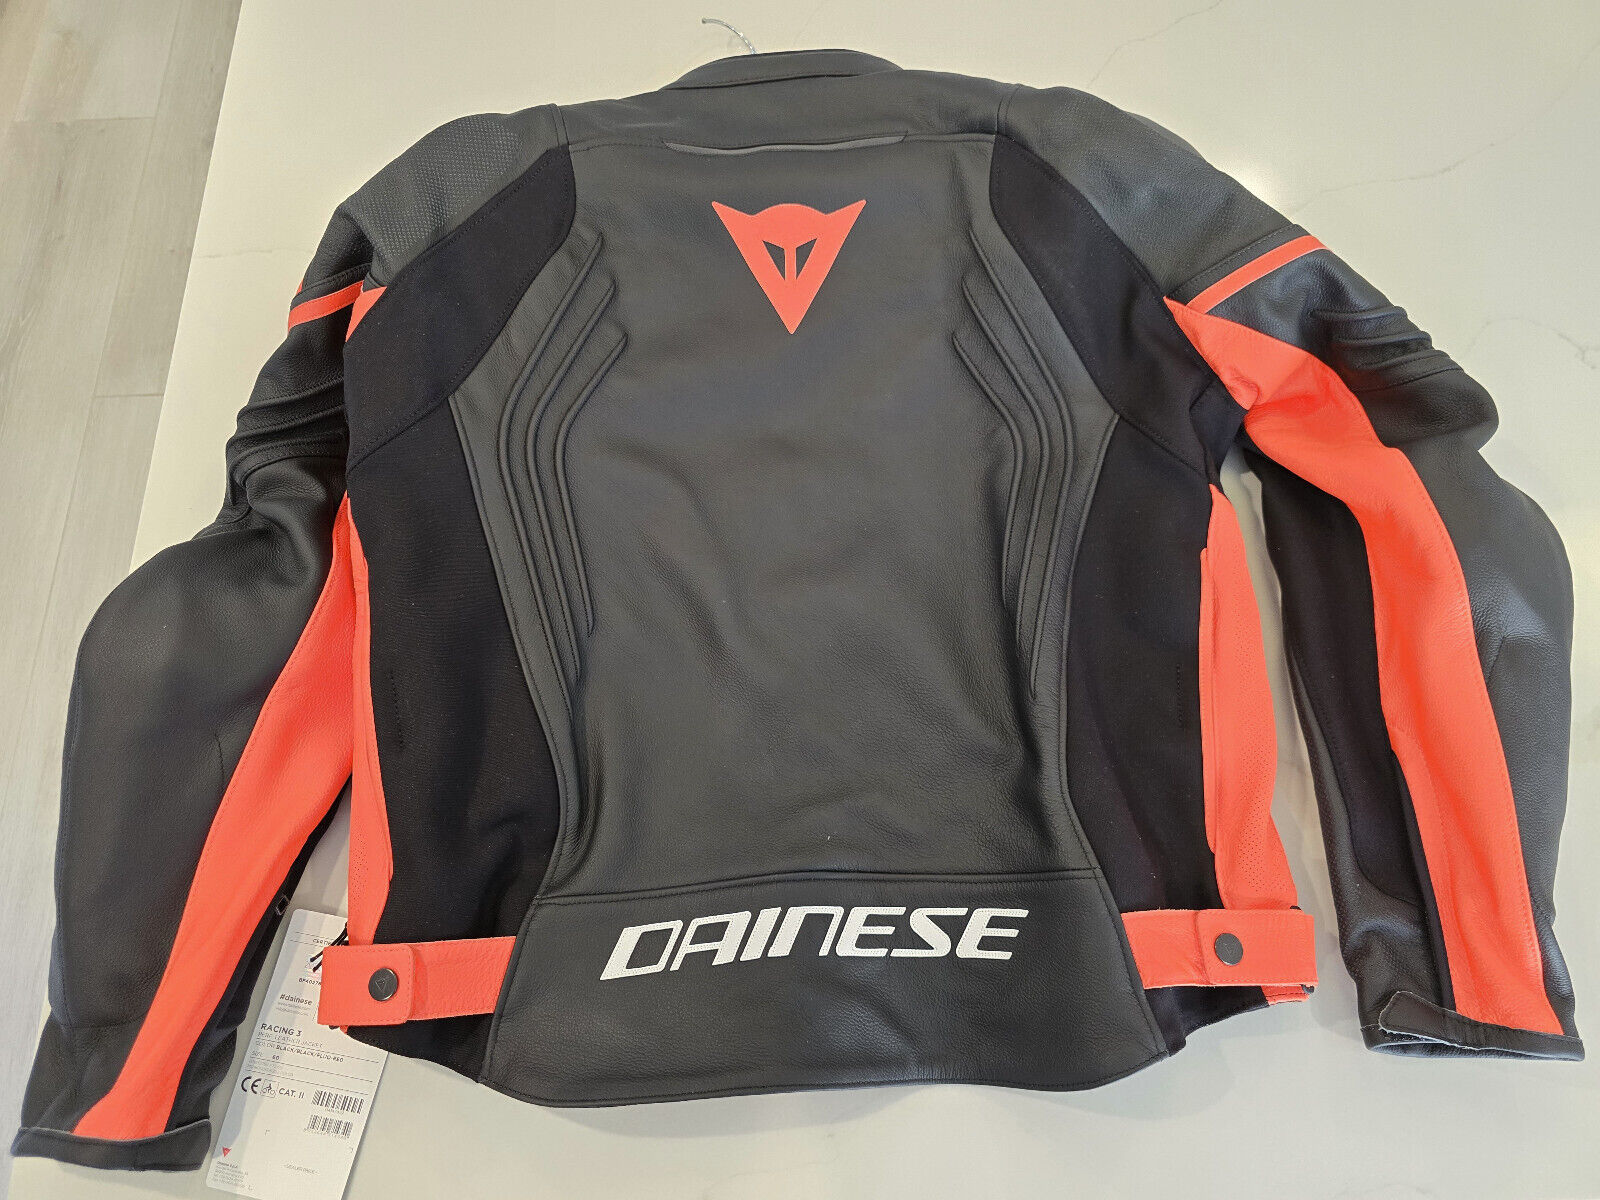 Dainese RACING 3 PERF. LEATHER JACKET *NEW* Black/Red  Euro size 60. US size 50.